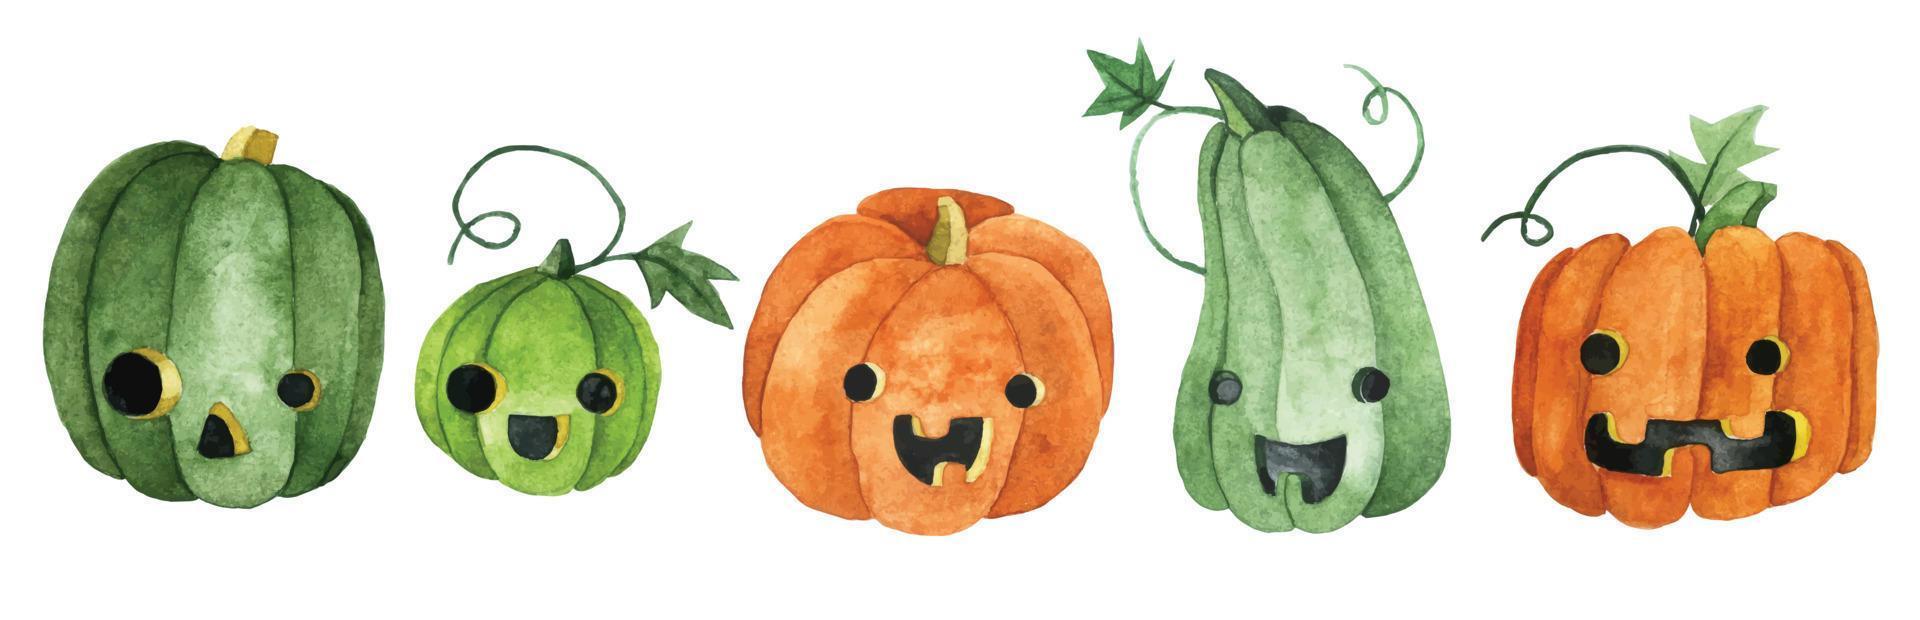 watercolor drawing, set of cute halloween pumpkins. green and orange pumpkins, with funny faces, cute picture for kids. vector